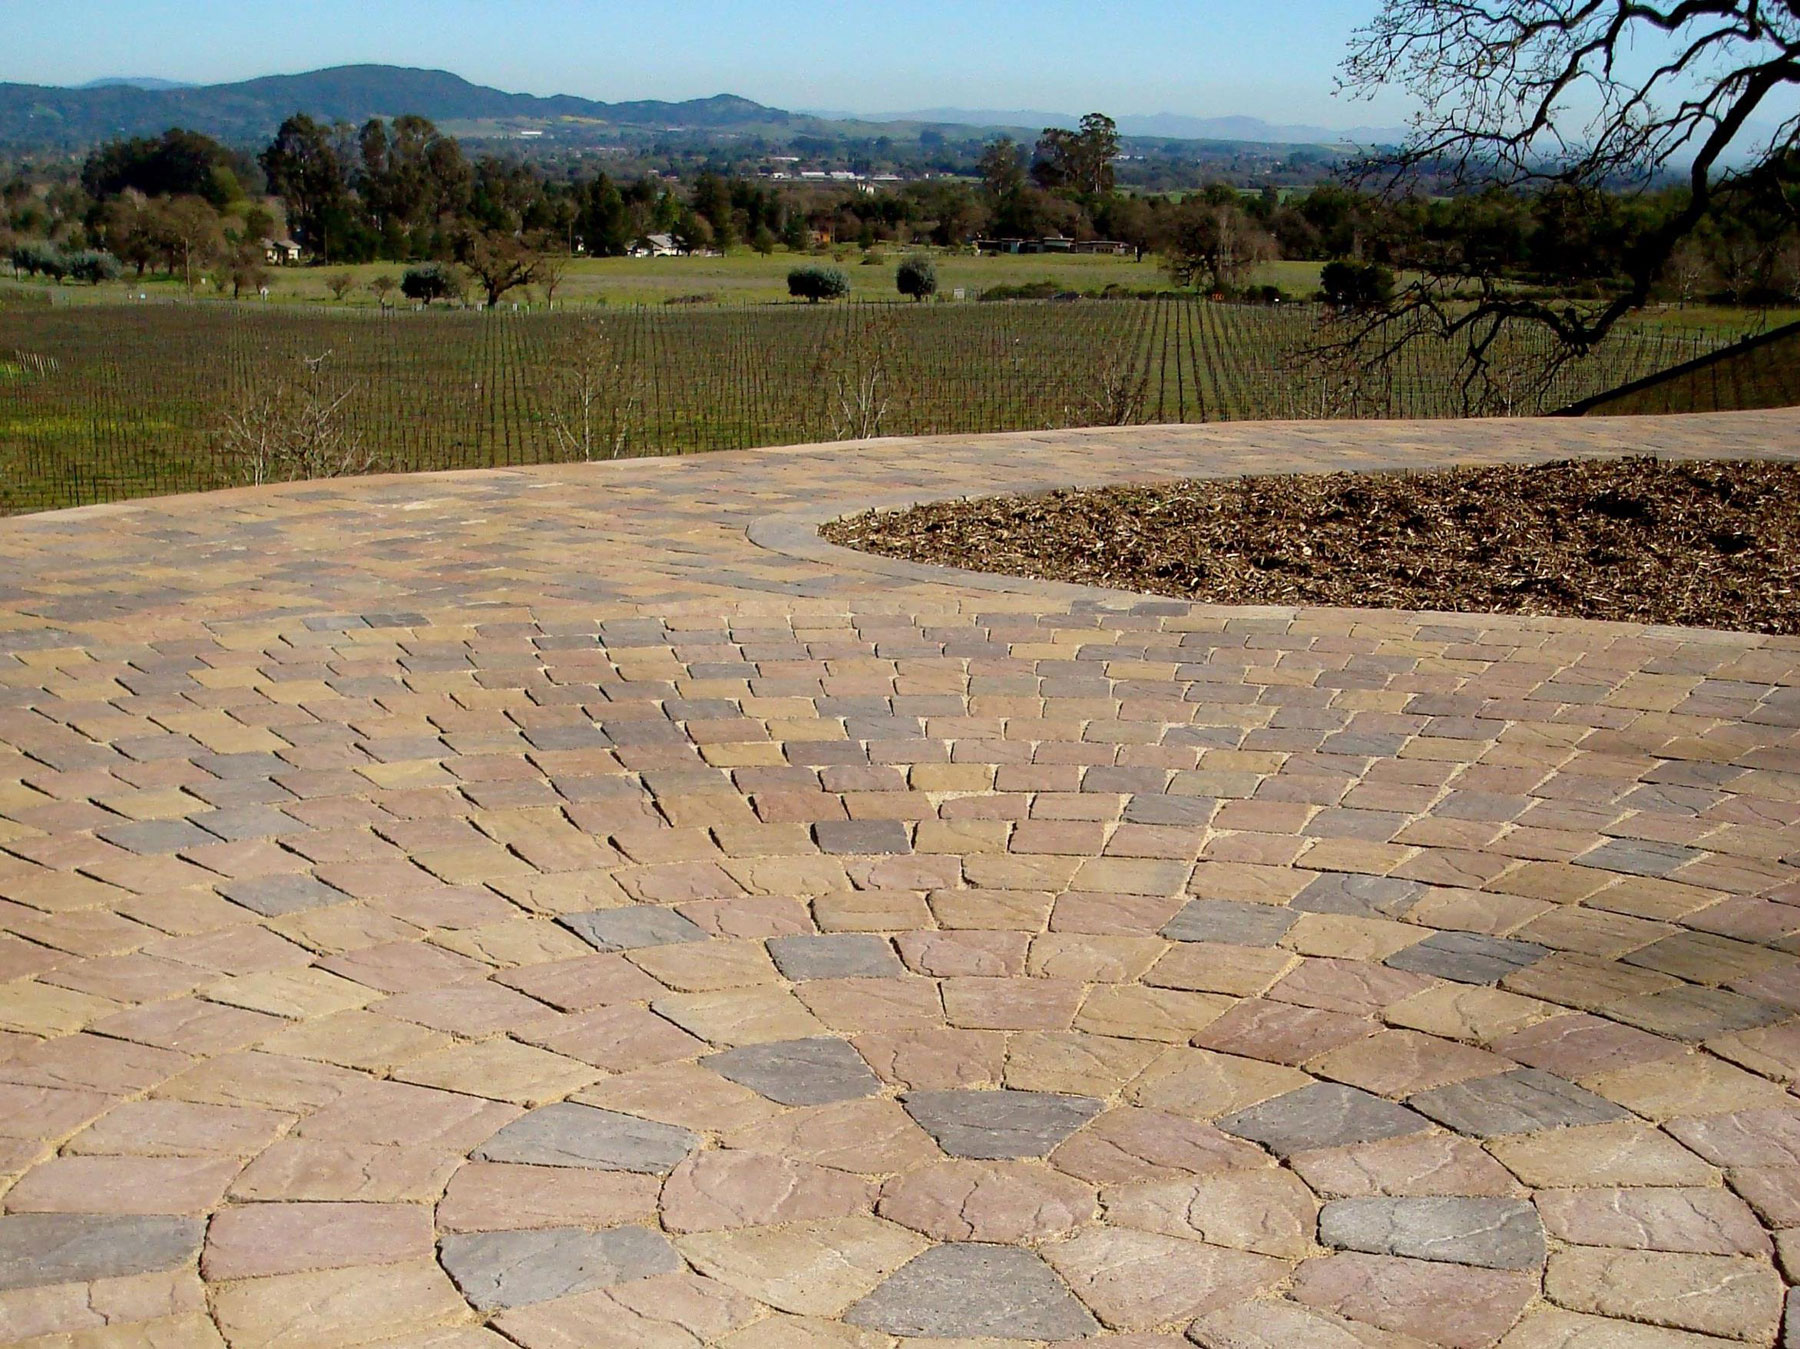 Stone paver circular feature at a winery